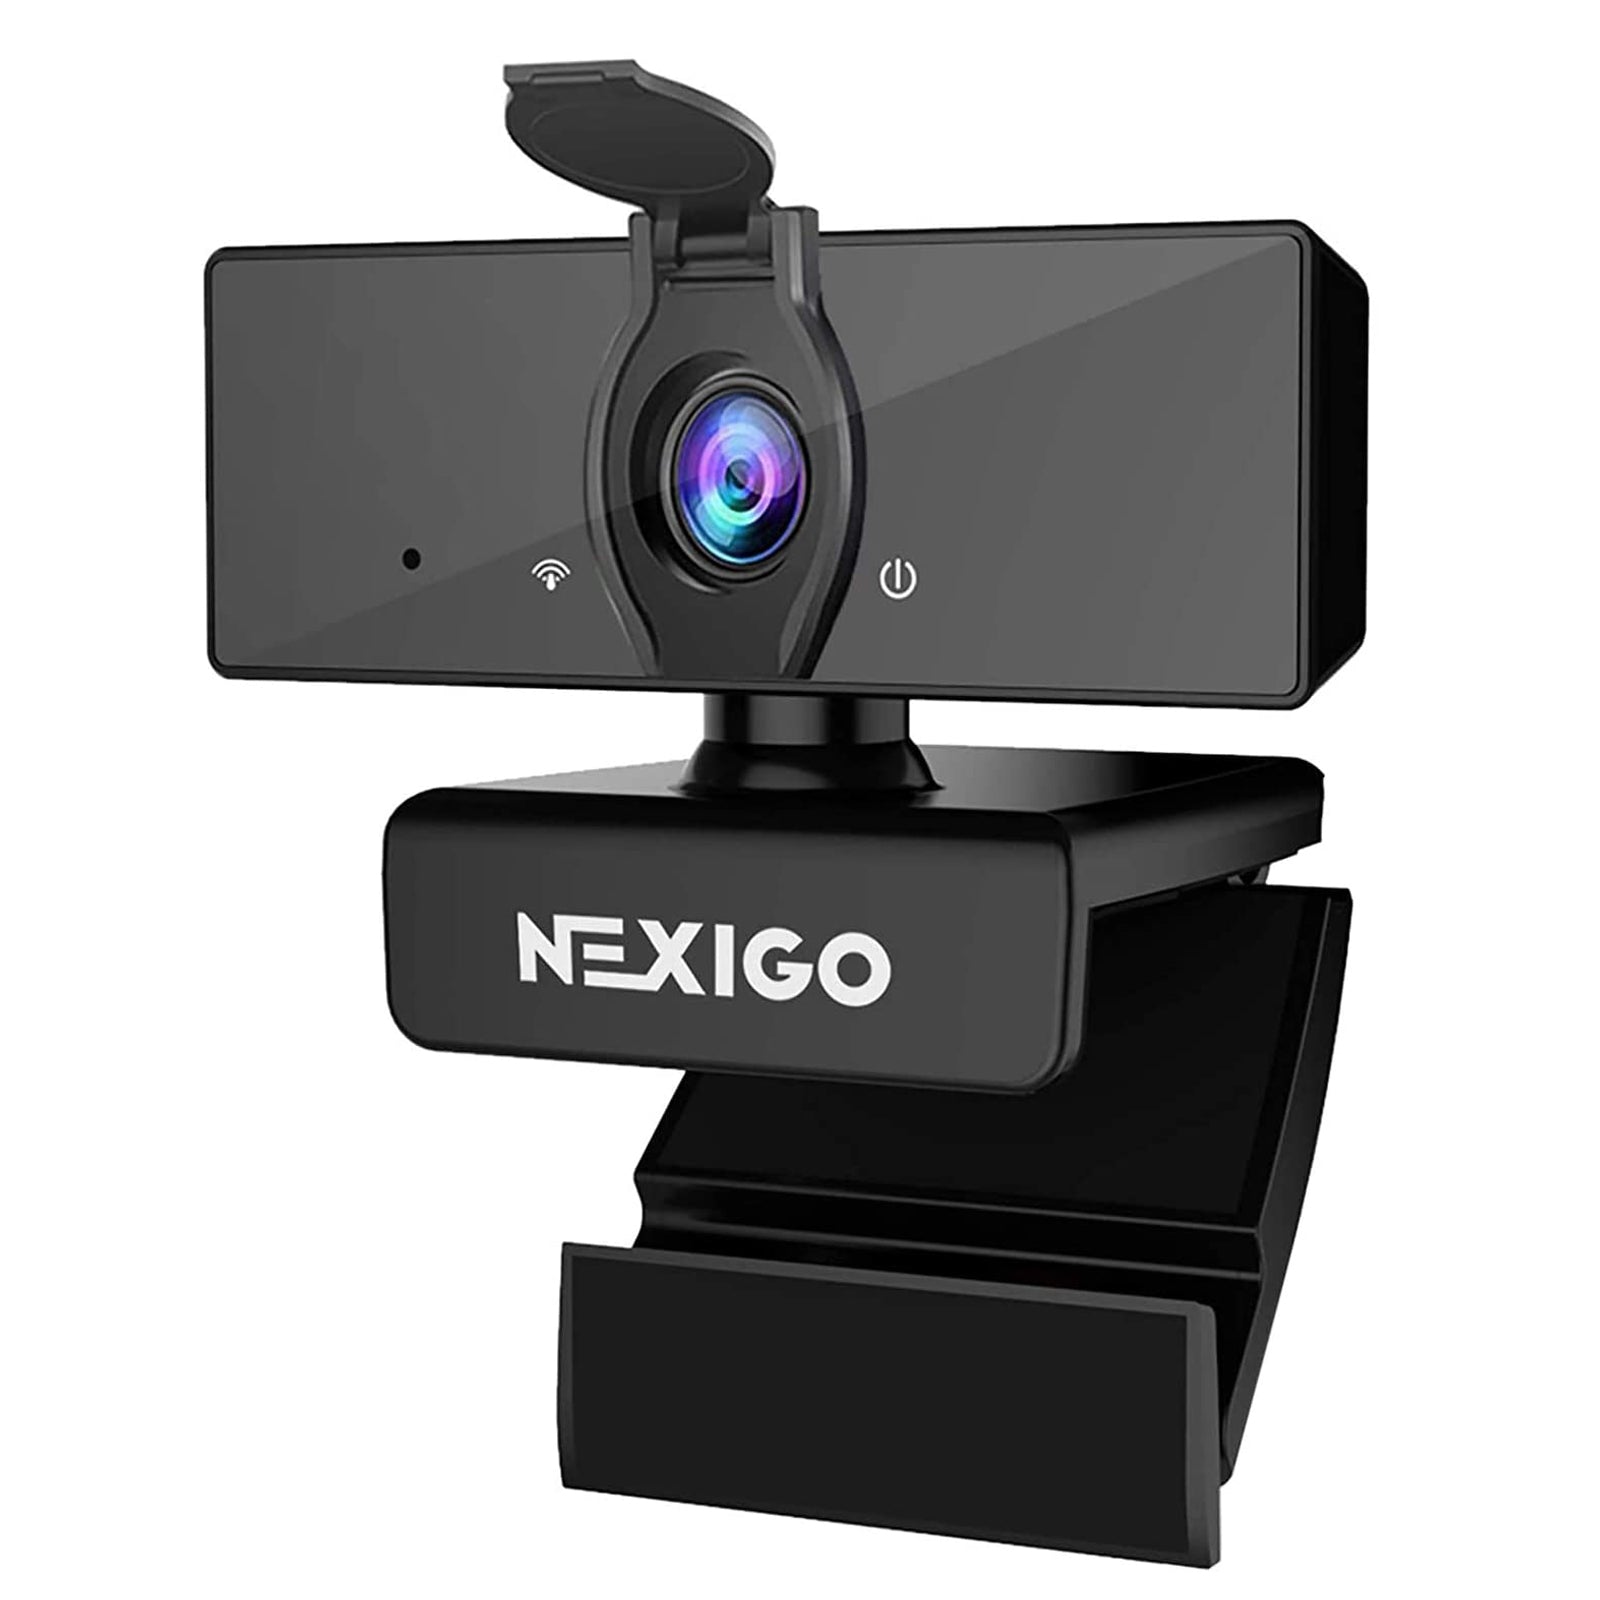 A 1080p N660 webcam with privacy cover.